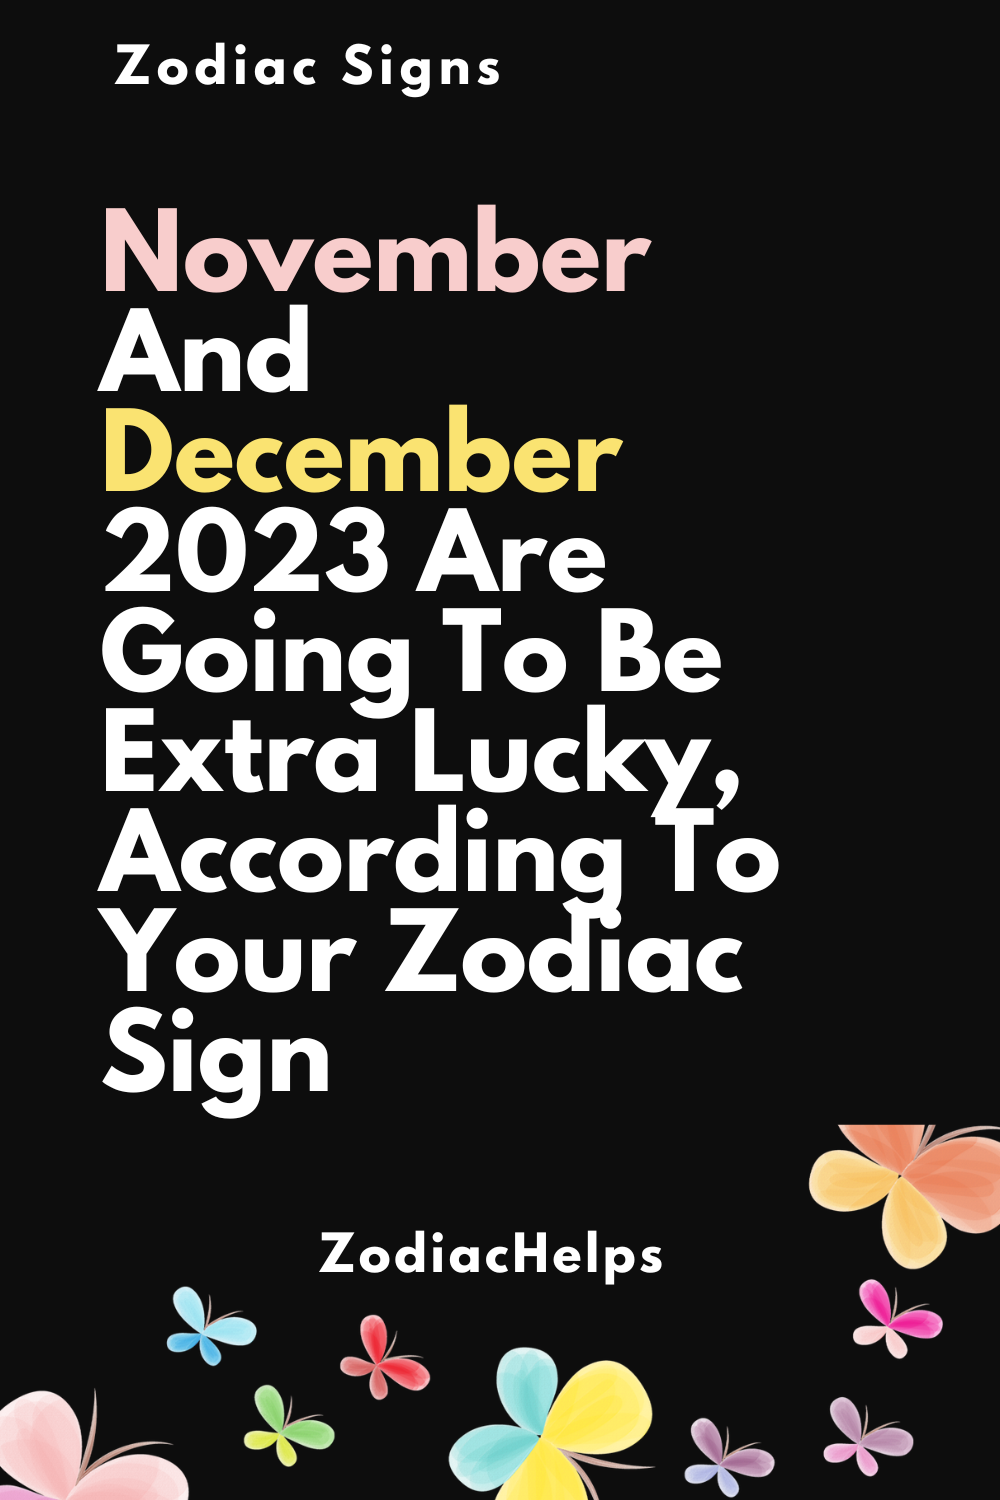 November And December 2023 Are Going To Be Extra Lucky, According To Your Zodiac Sign